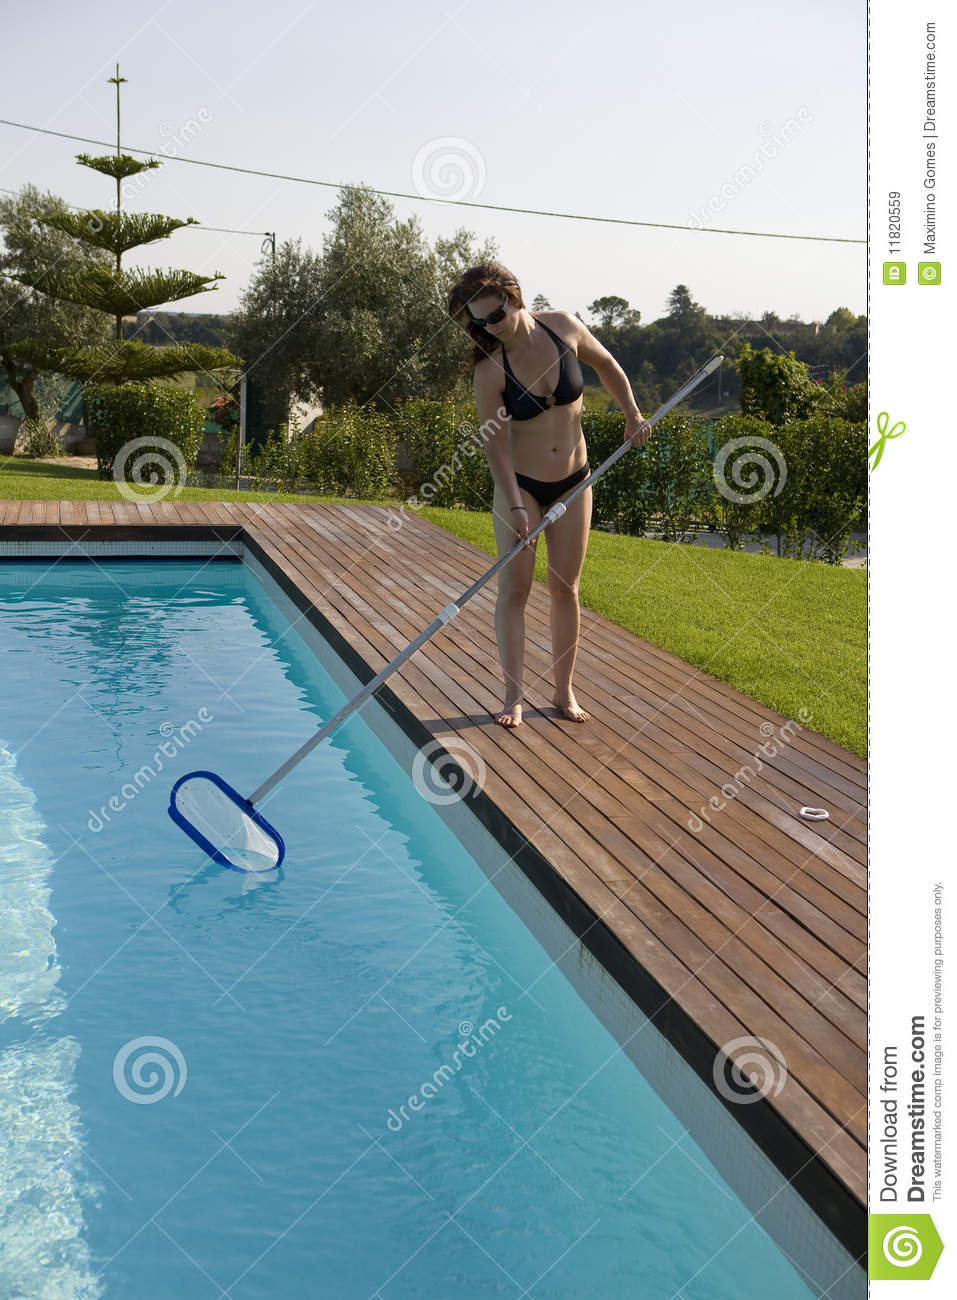 Woman Cleaning The Pool Royalty Free Stock Images   Image  11820559